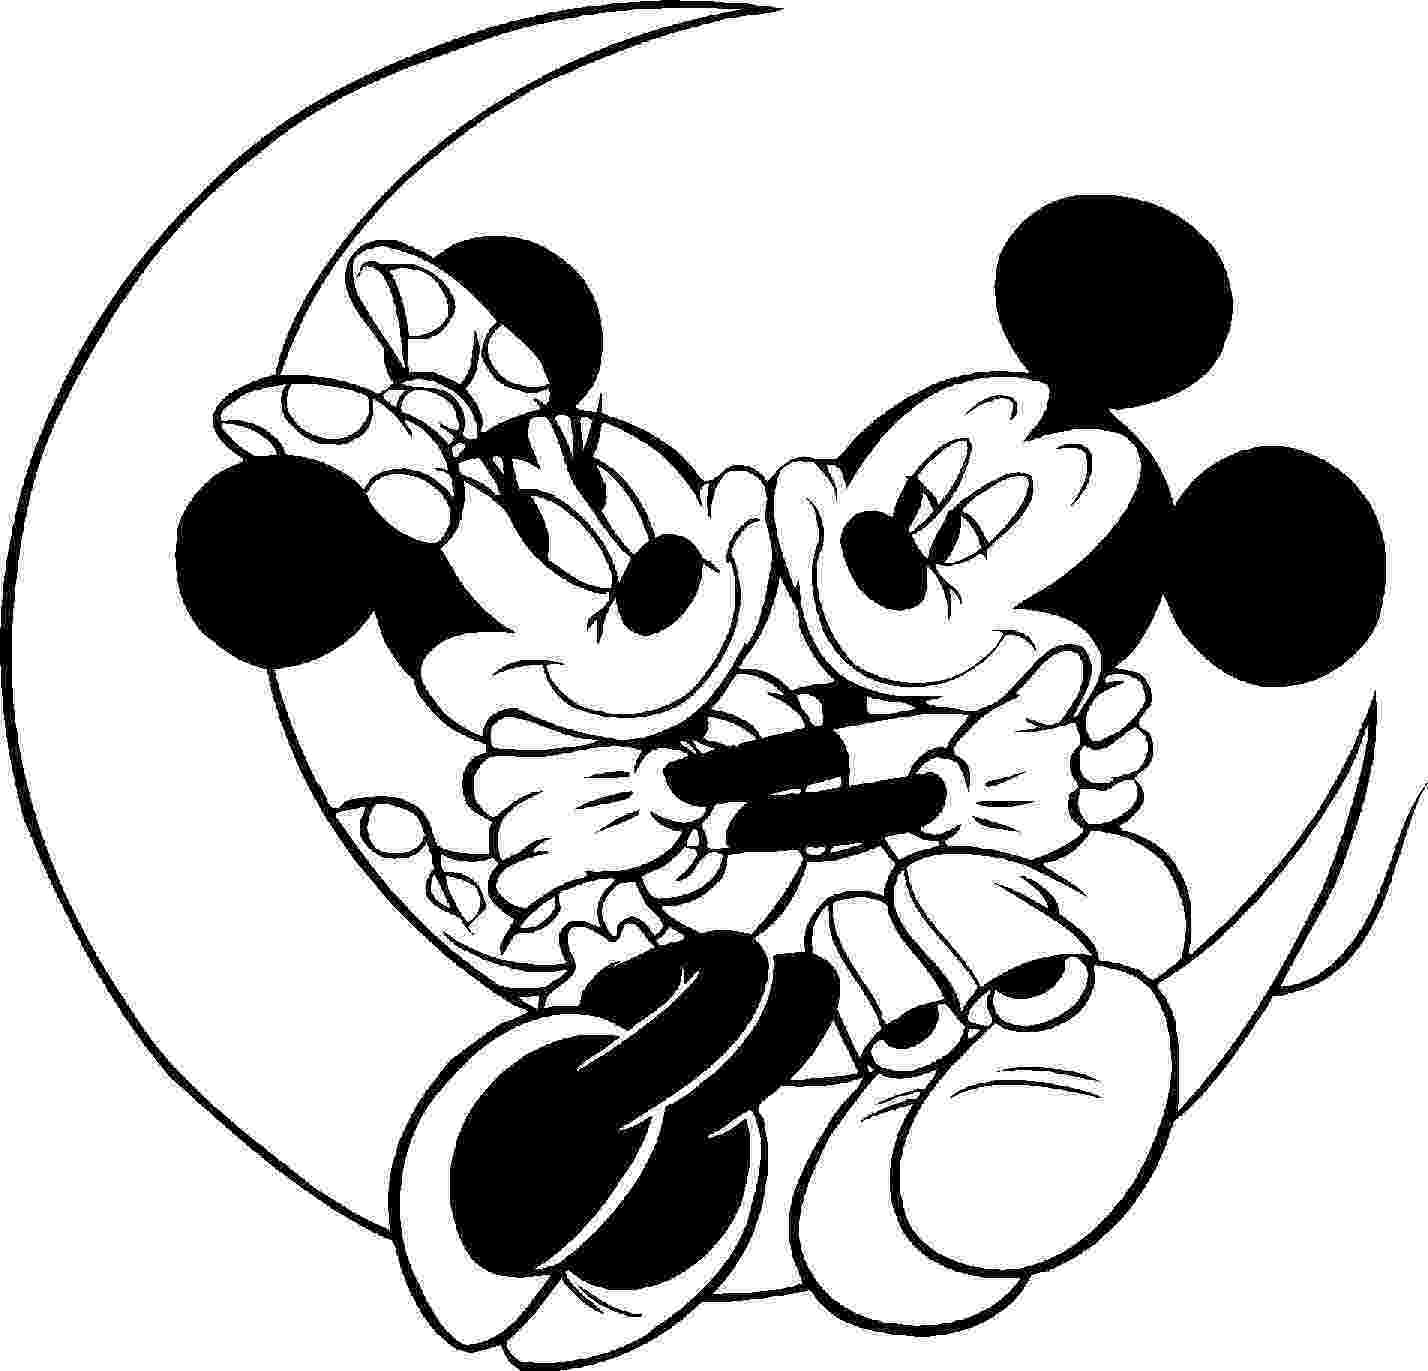 free printable mickey and minnie mouse coloring pages disney valentine colorng pages with mickey and minnie pages mouse coloring free mickey printable minnie and 